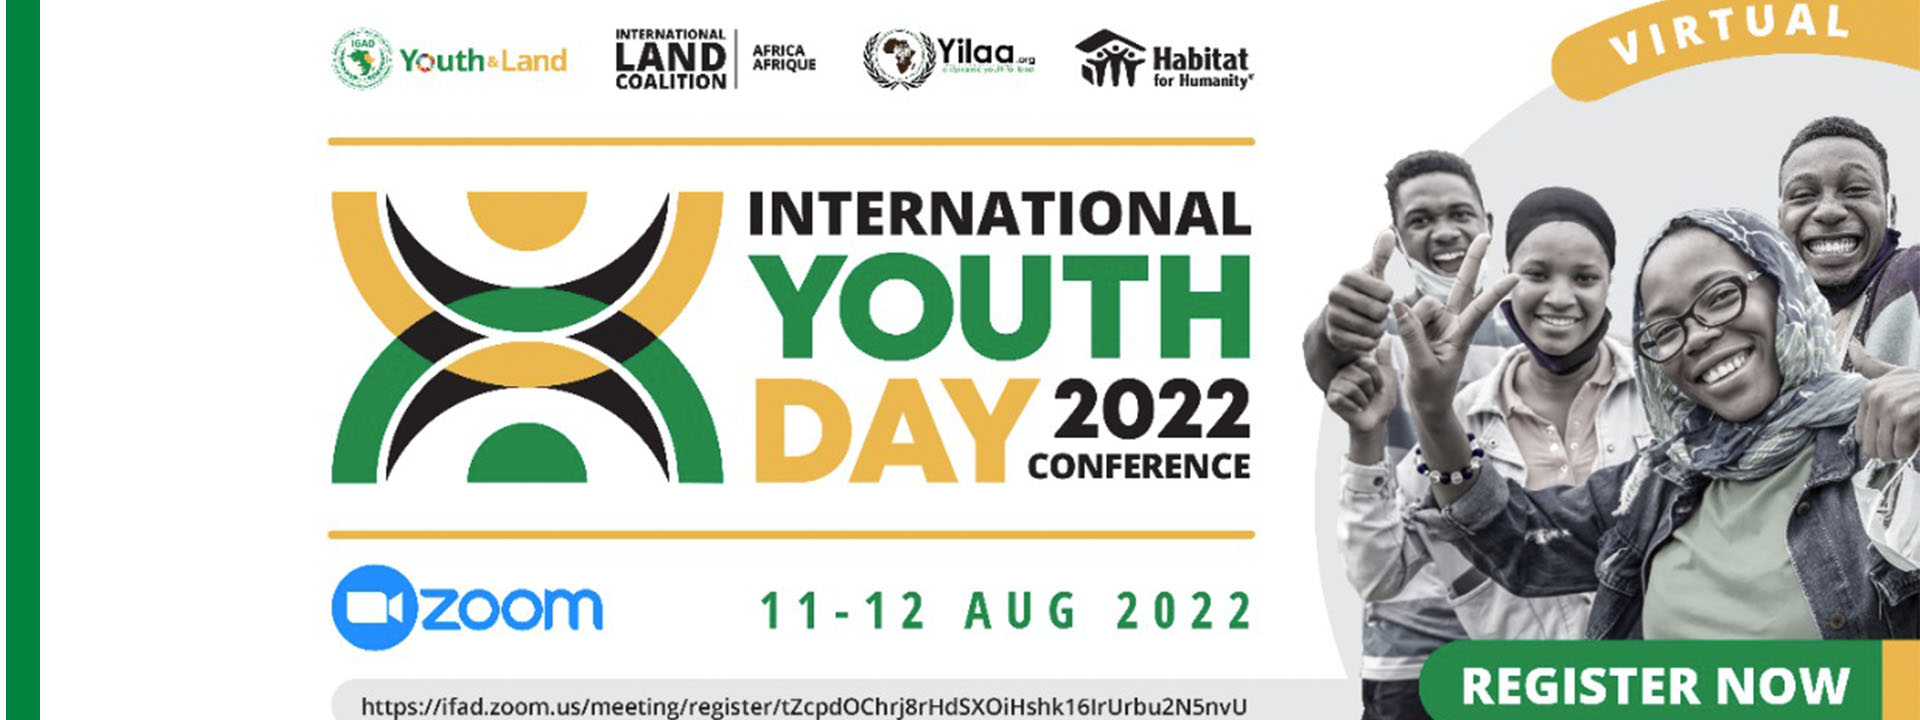 International Youth Day 2022 Conference